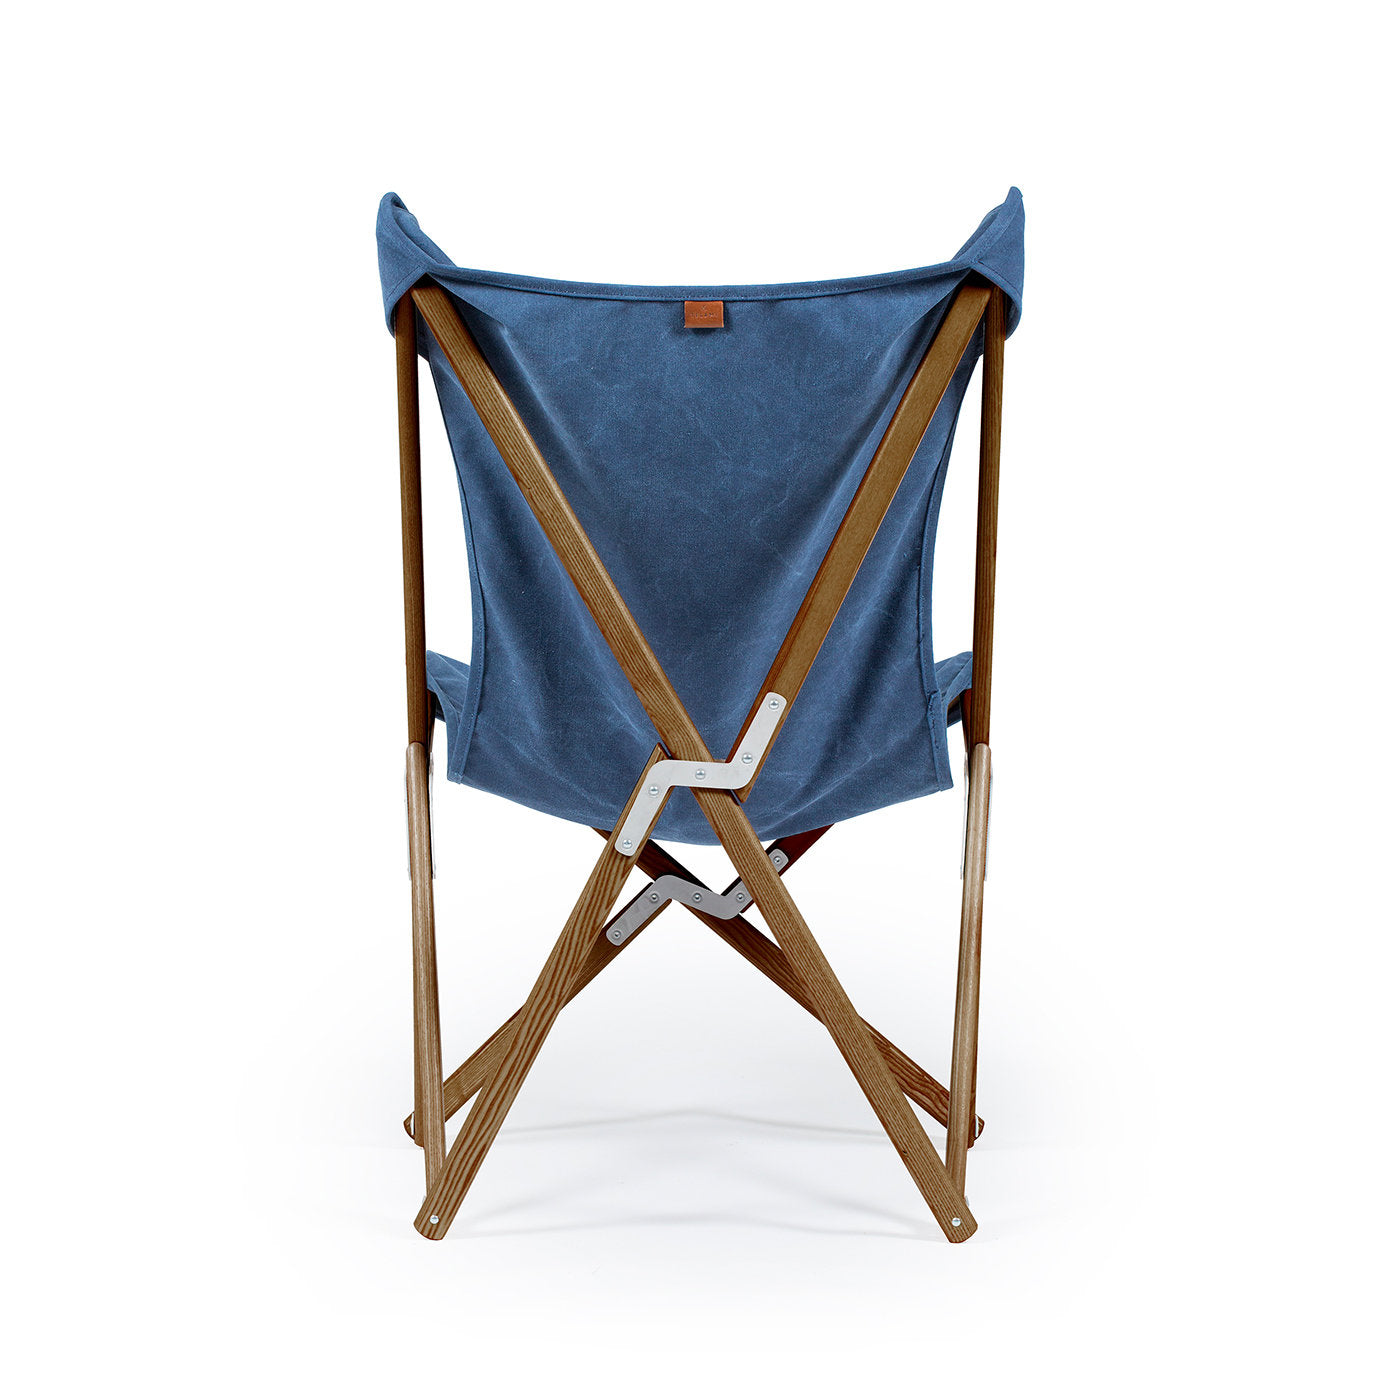 Tripolina Armchair in Blue Jeans - Alternative view 3